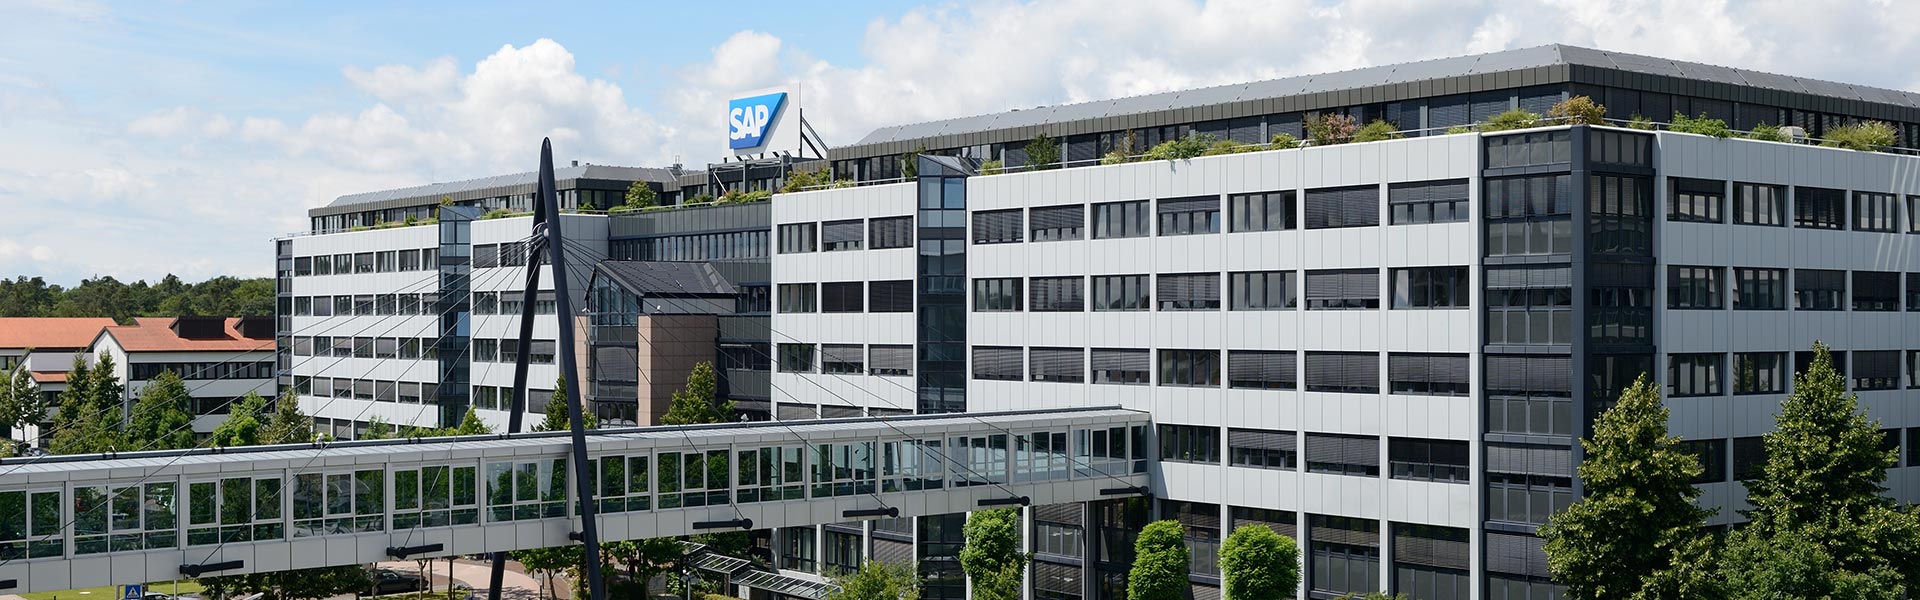 SAP Names Christian Klein as Chief Operating Officer, Thomas Saueressig as Chief Information Officer